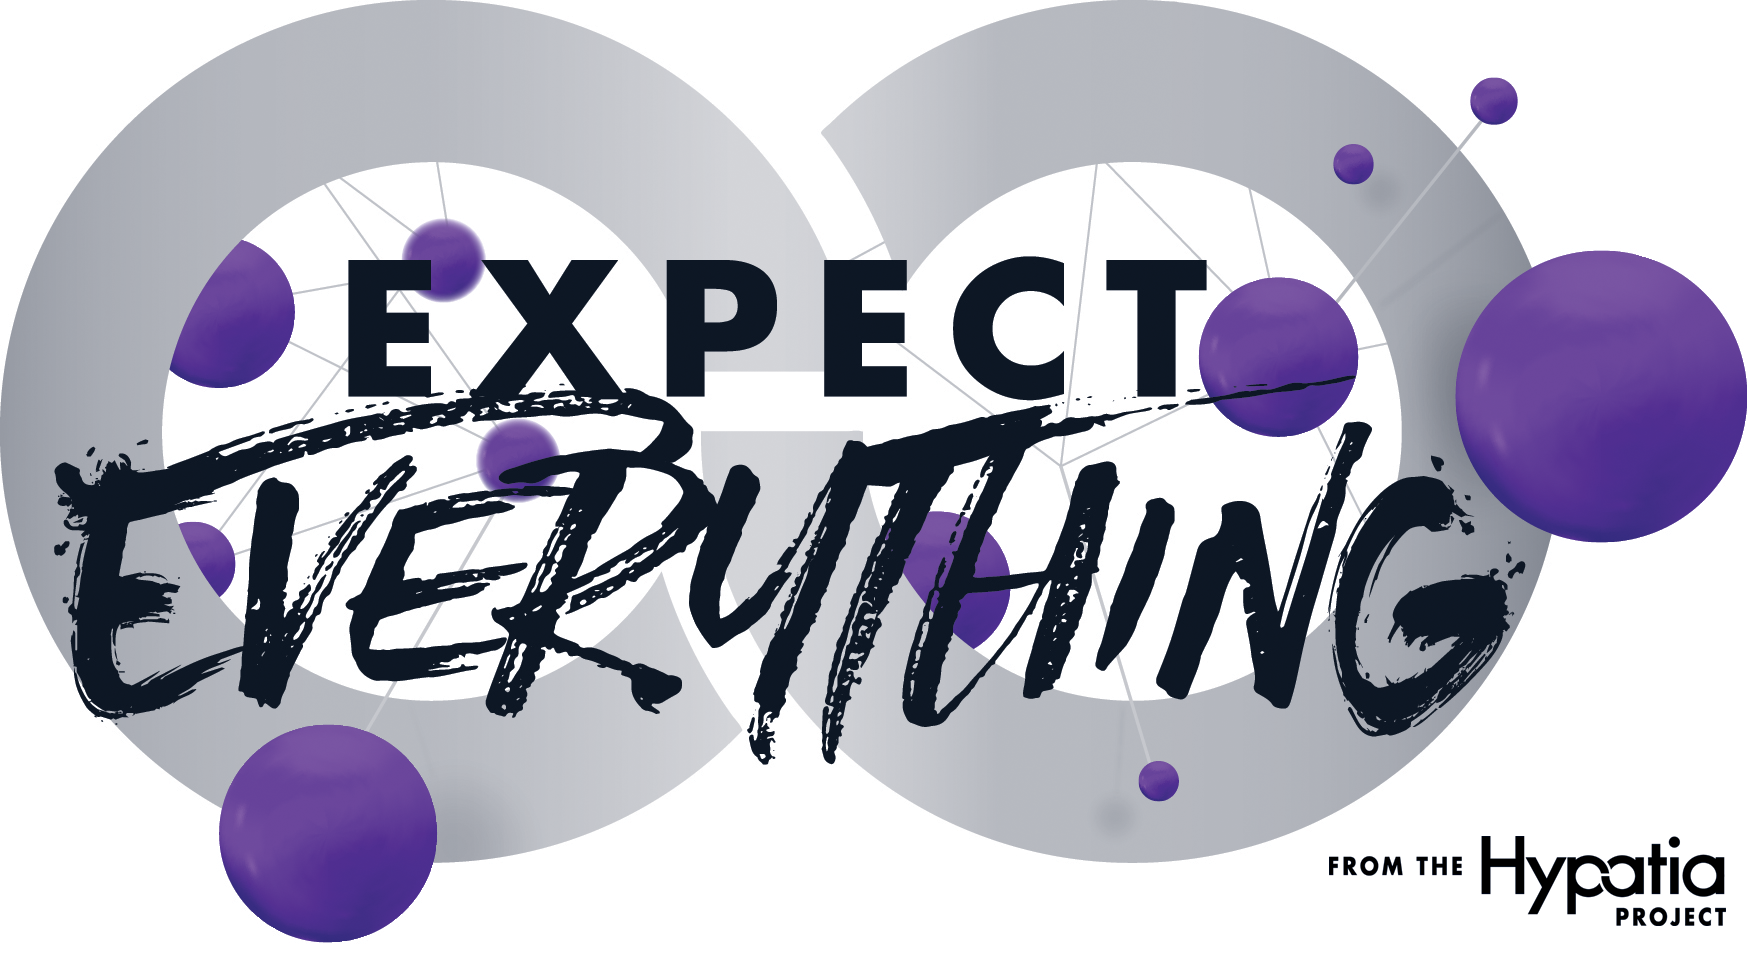 Expect Everything